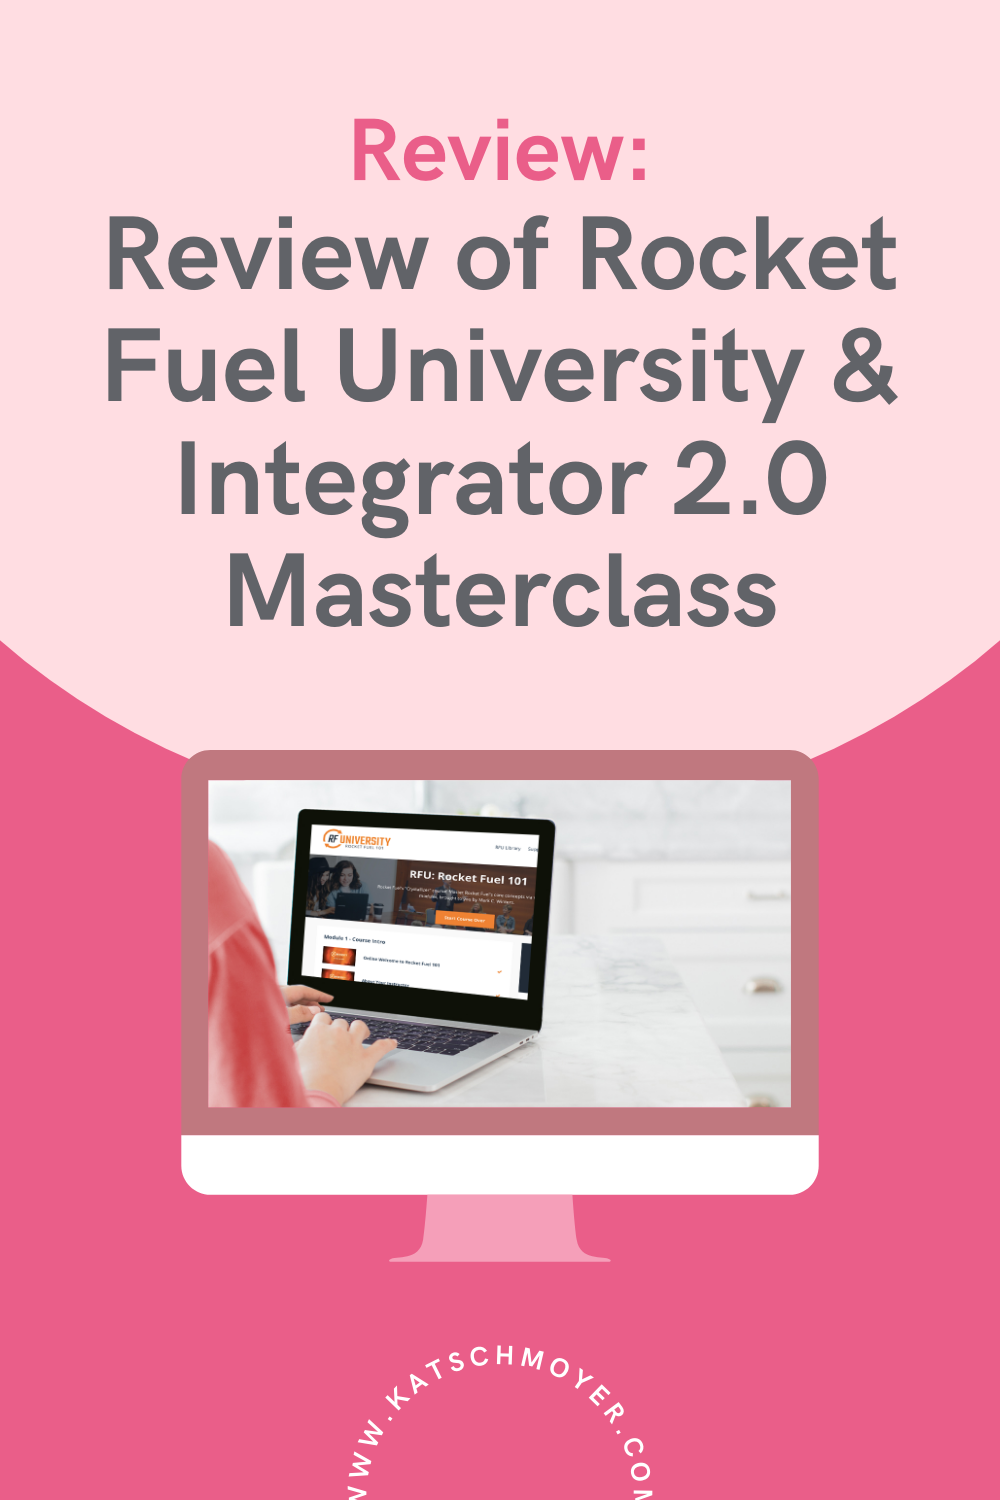 Review of Rocket Fuel University and Integrator 2.0 Masterclass shared by Kat Schmoyer